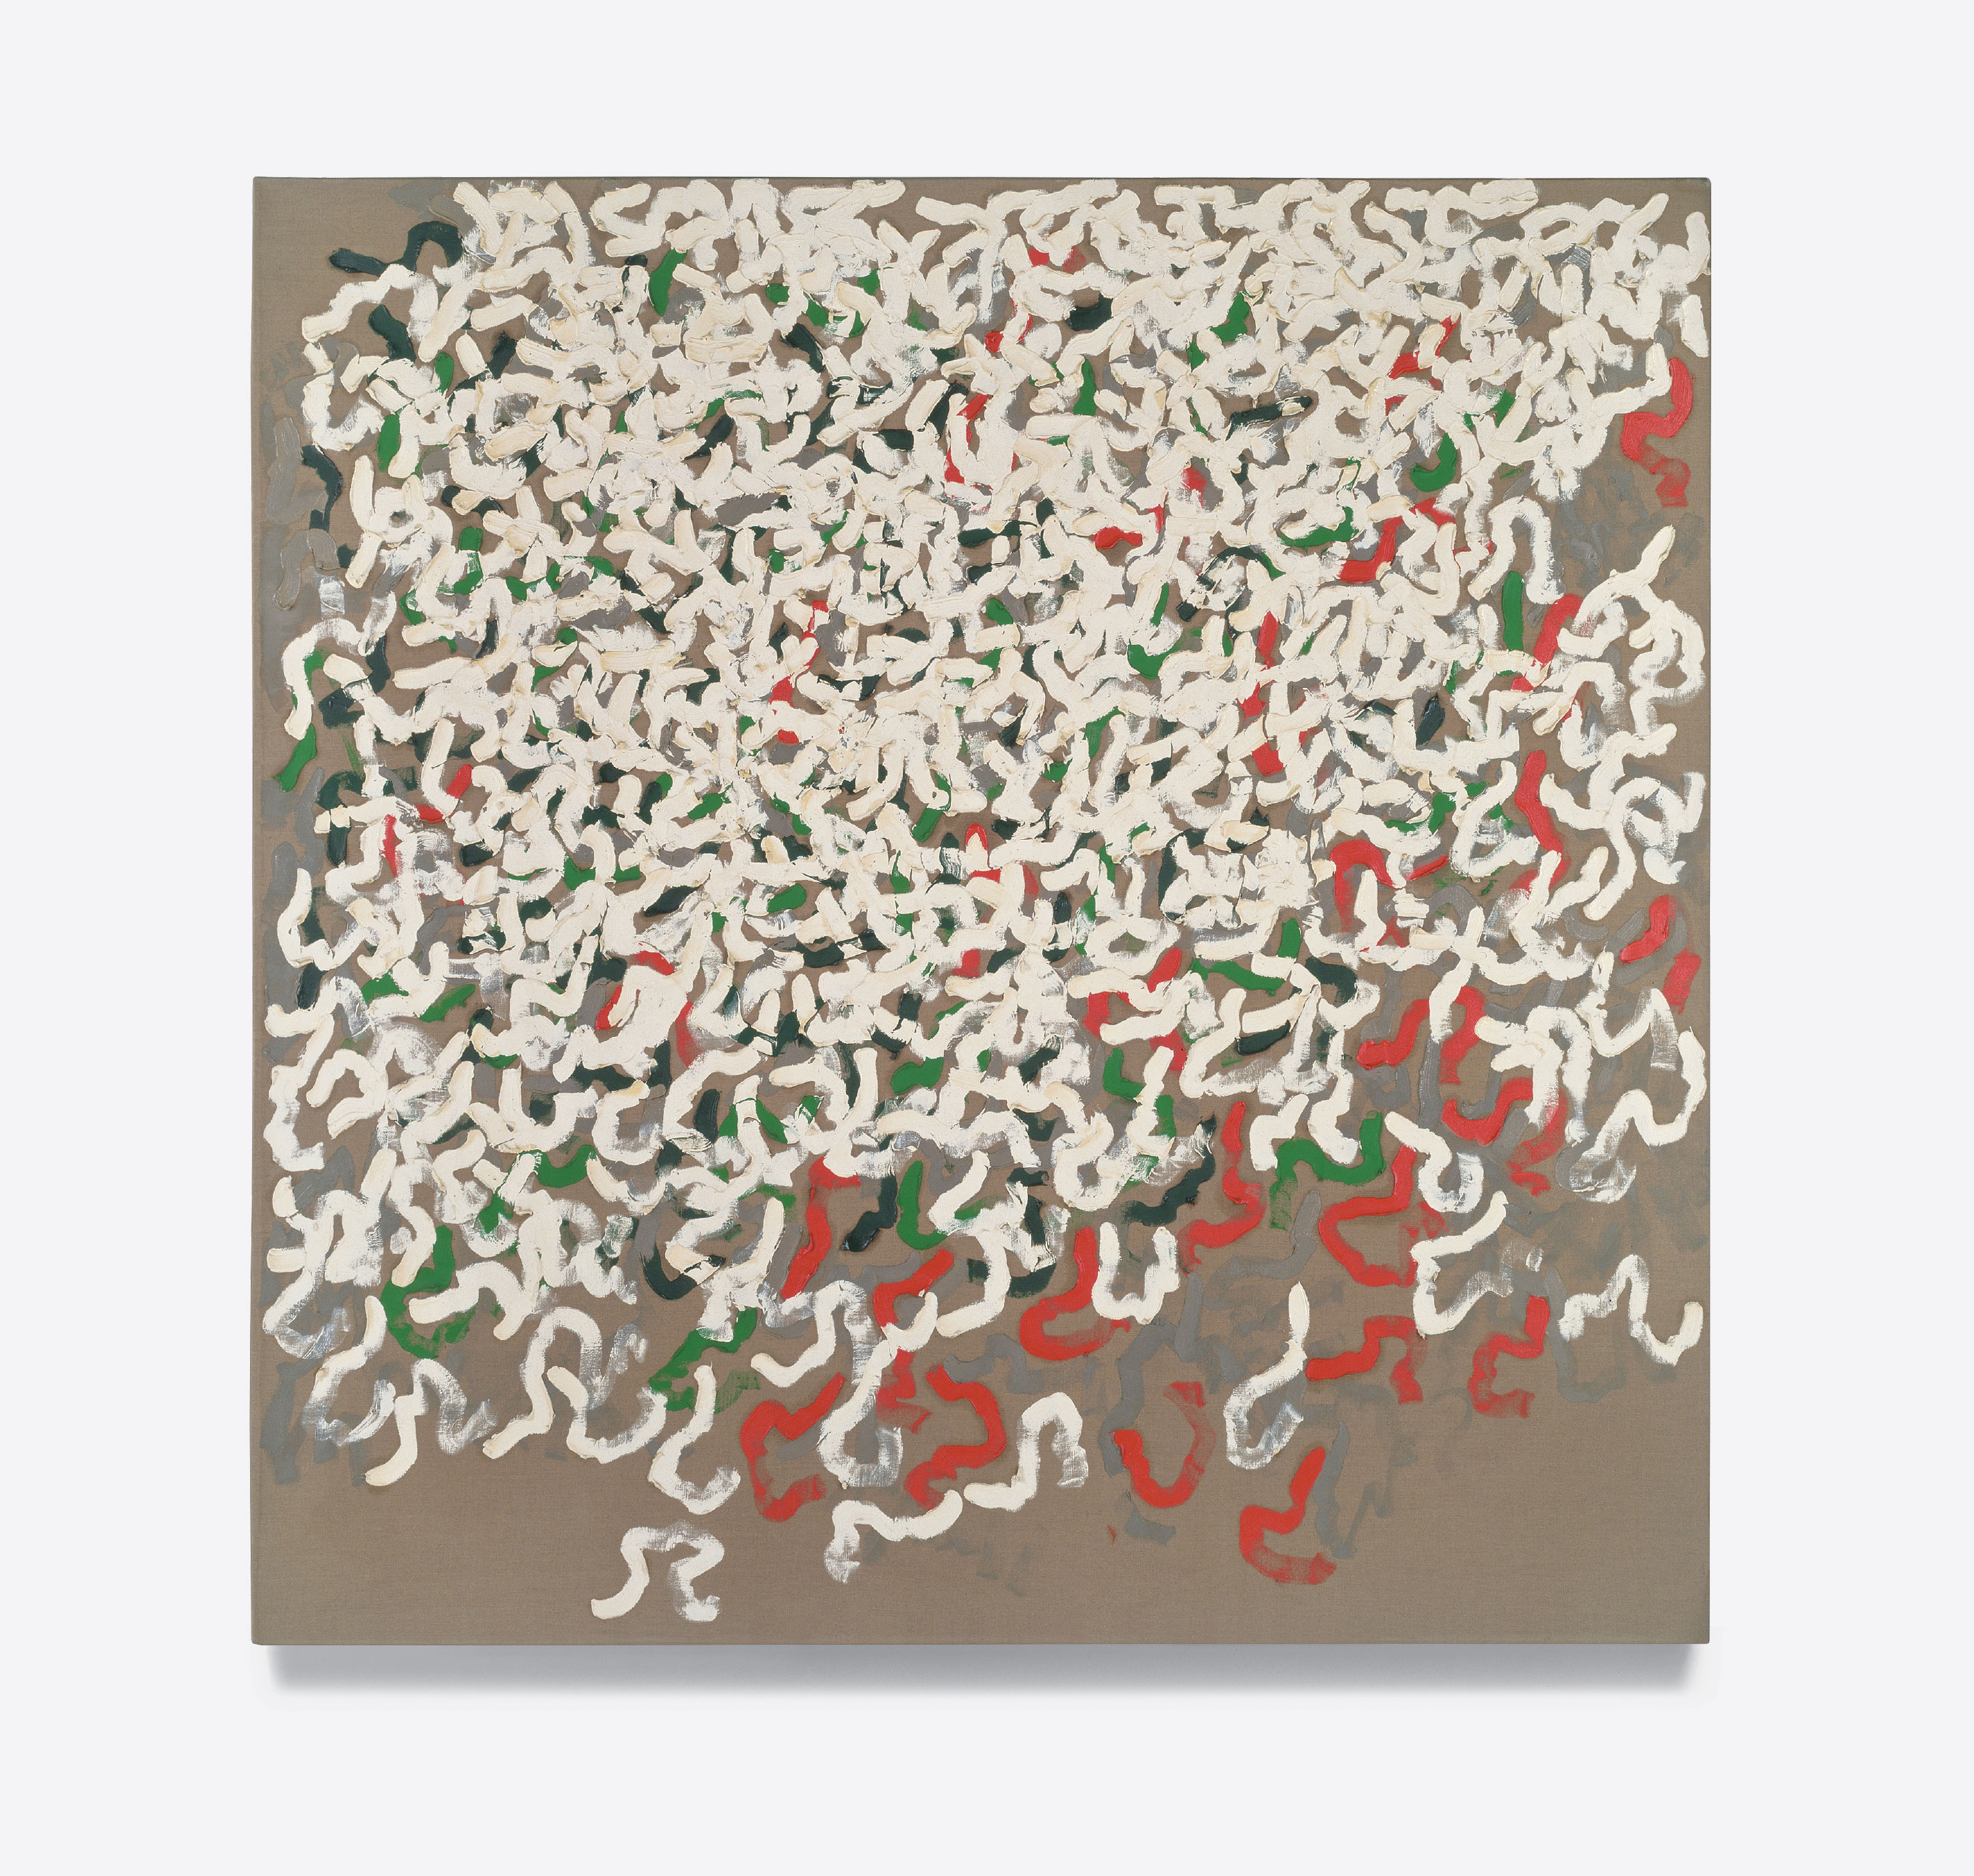 Robert Ryman, Untitled, c.1963; oil on stretched sized linen canvas, 77¾ × 77½ in (197.5 × 196.9 cm); Private collection. Picture credit: artwork © 2017 Robert Ryman/Artists Rights Society (ARS), New York / Photograph by Bill Jacobson for Robert Ryman Archive 